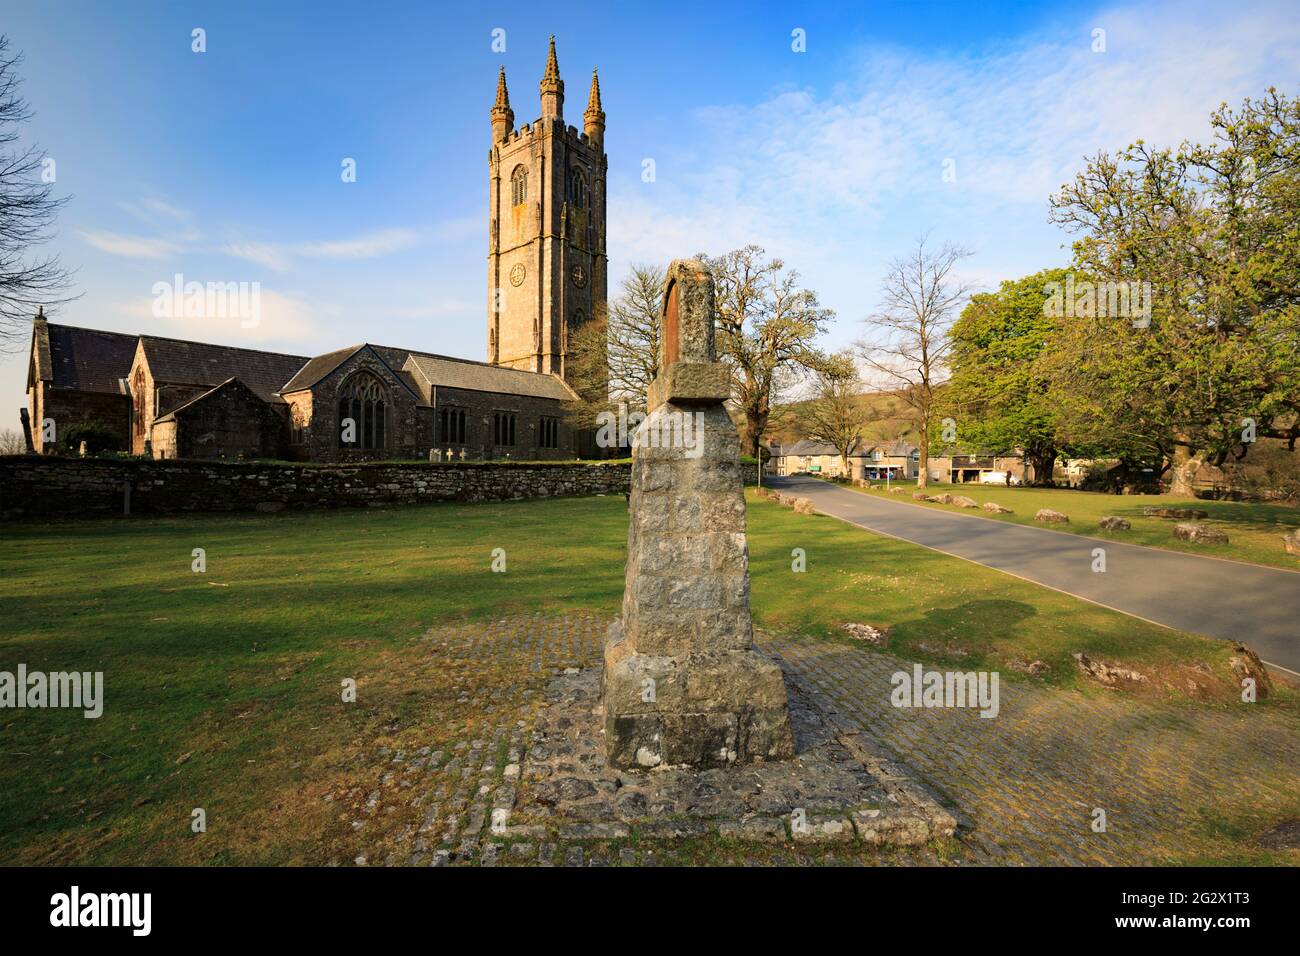 The church at Widecombe-in-the-moor in the Dartmoor National Park, Devon. Stock Photo